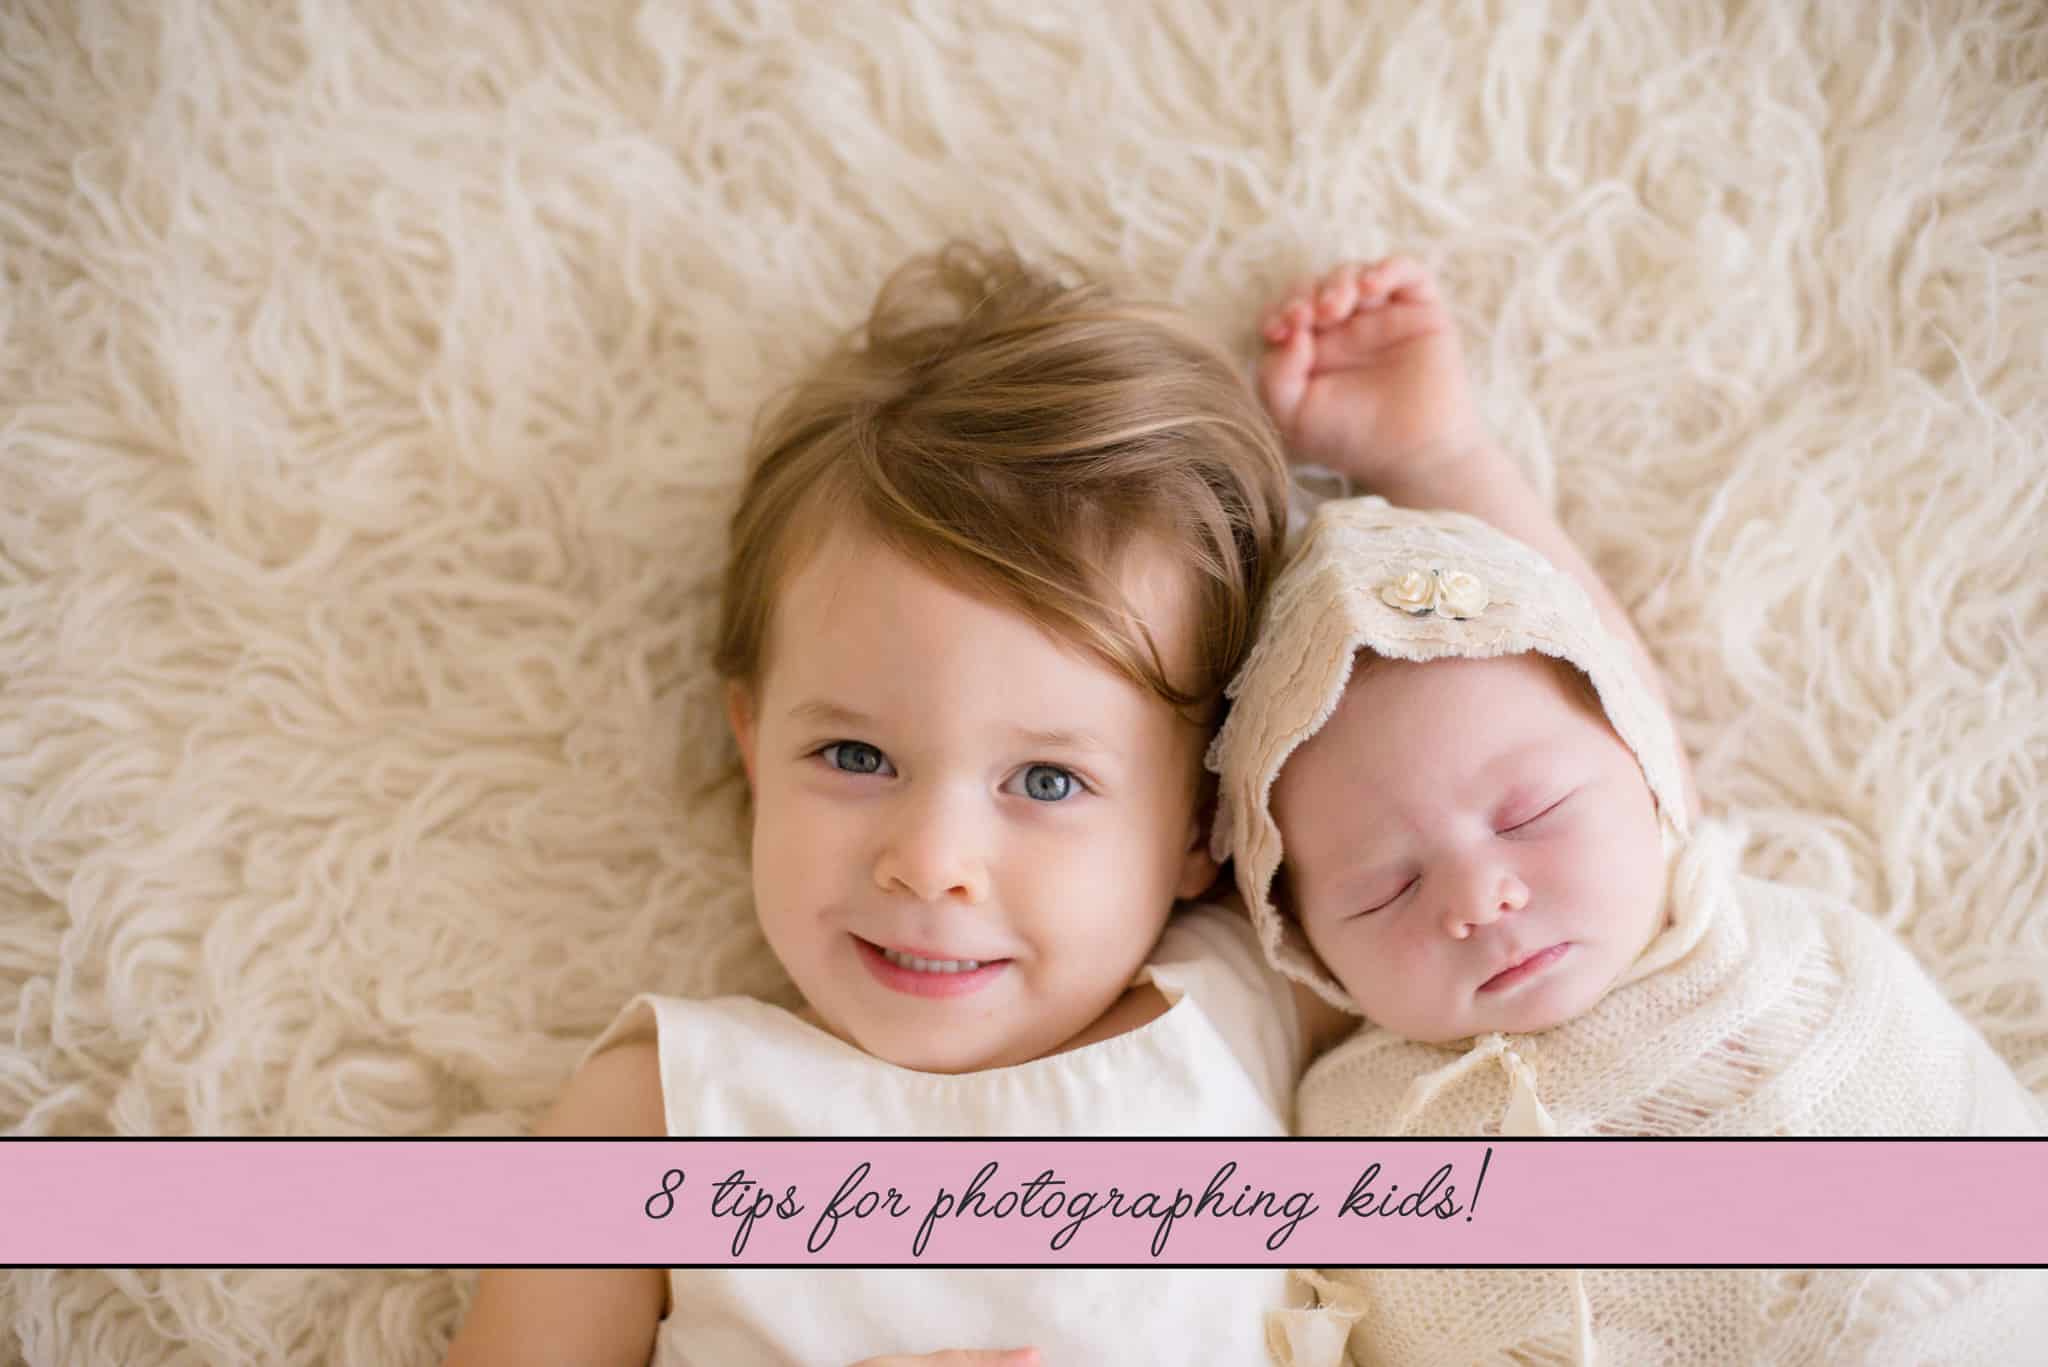 8 Tips for Photographing Kids